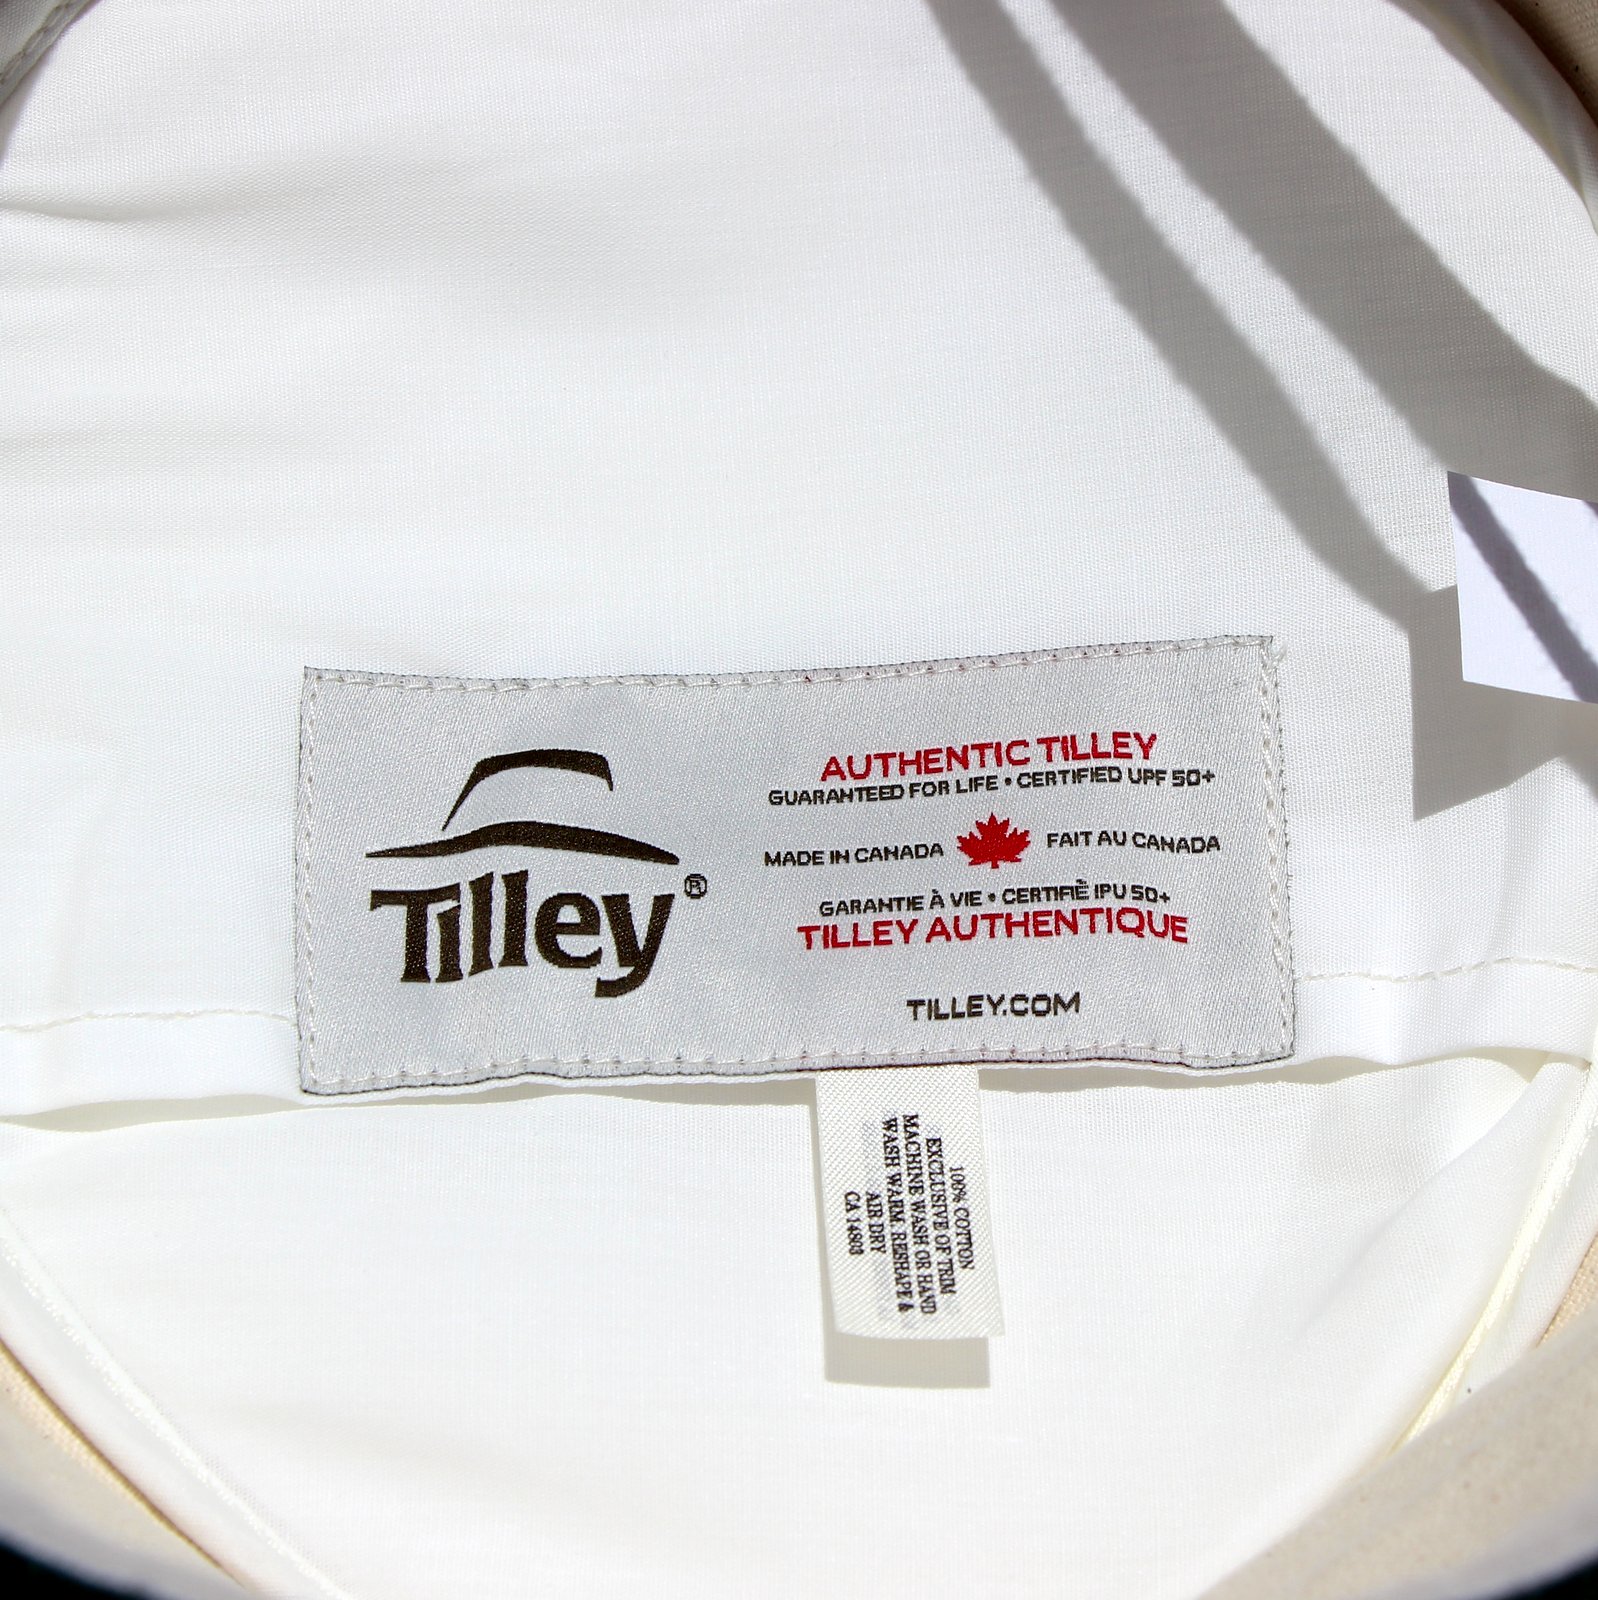 Salt Water New England: Tilley Hats - Made in Canada